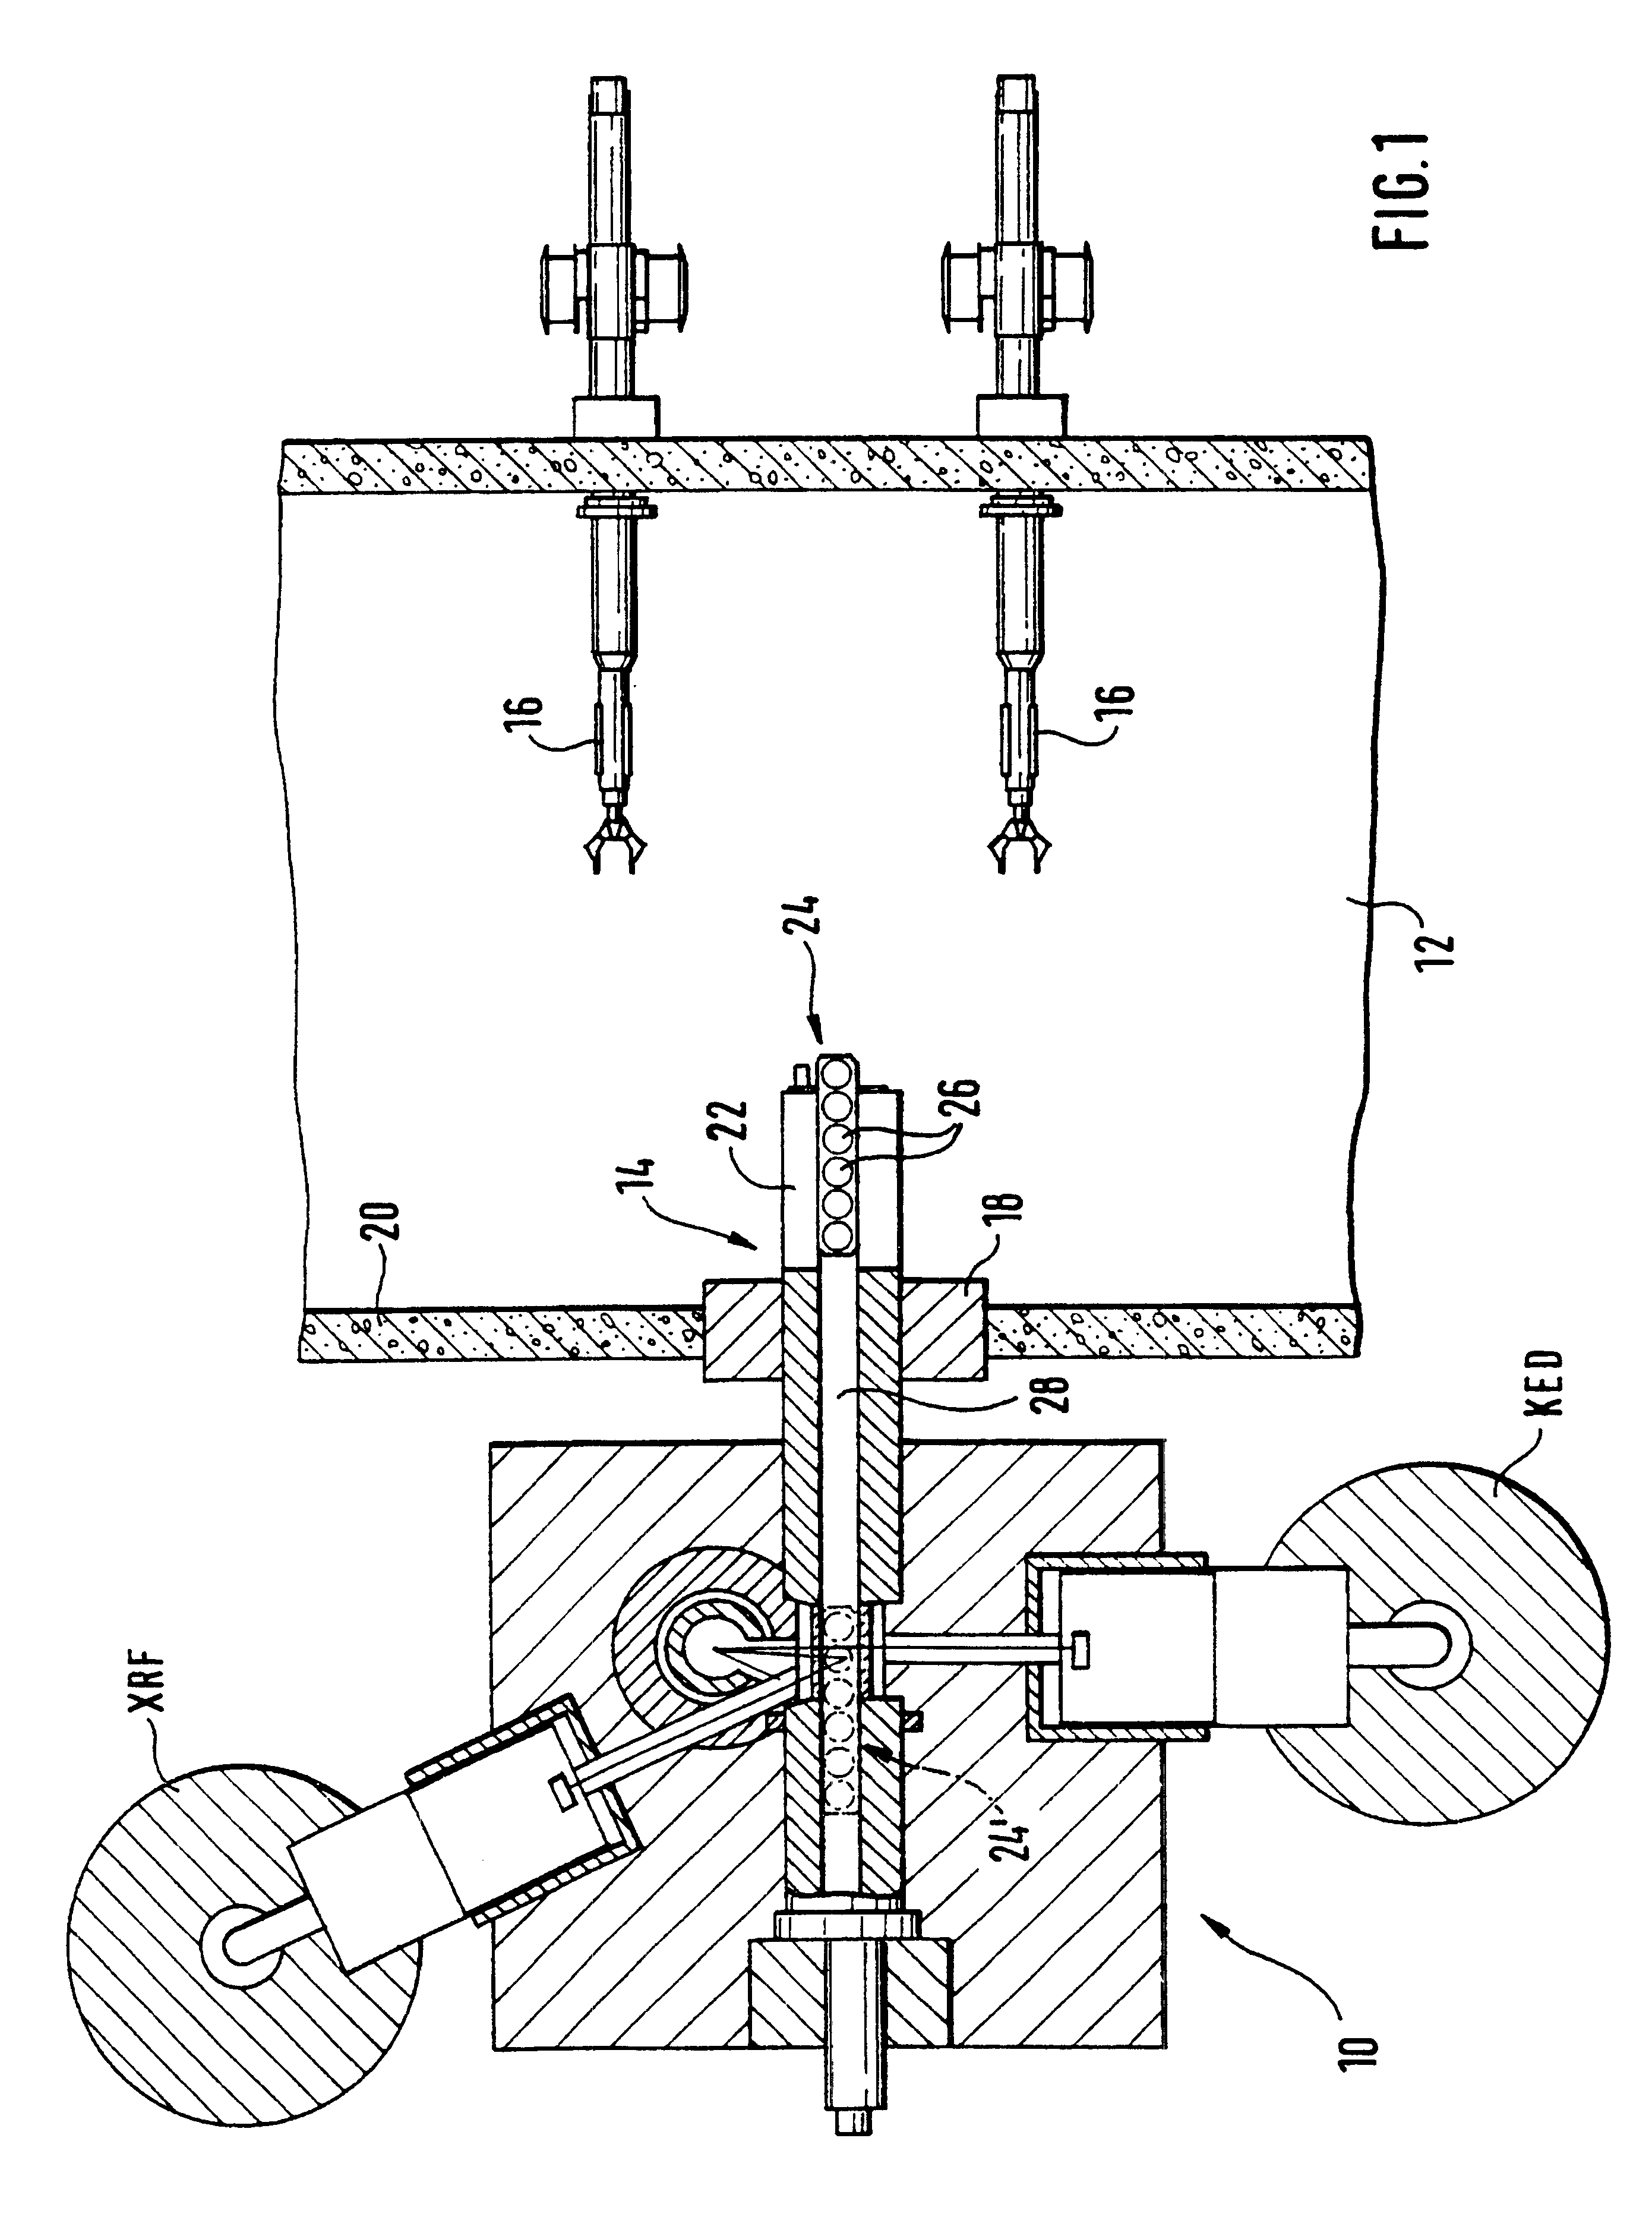 Sample changer for transferring radioactive samples between a hot cell and a measuring apparatus